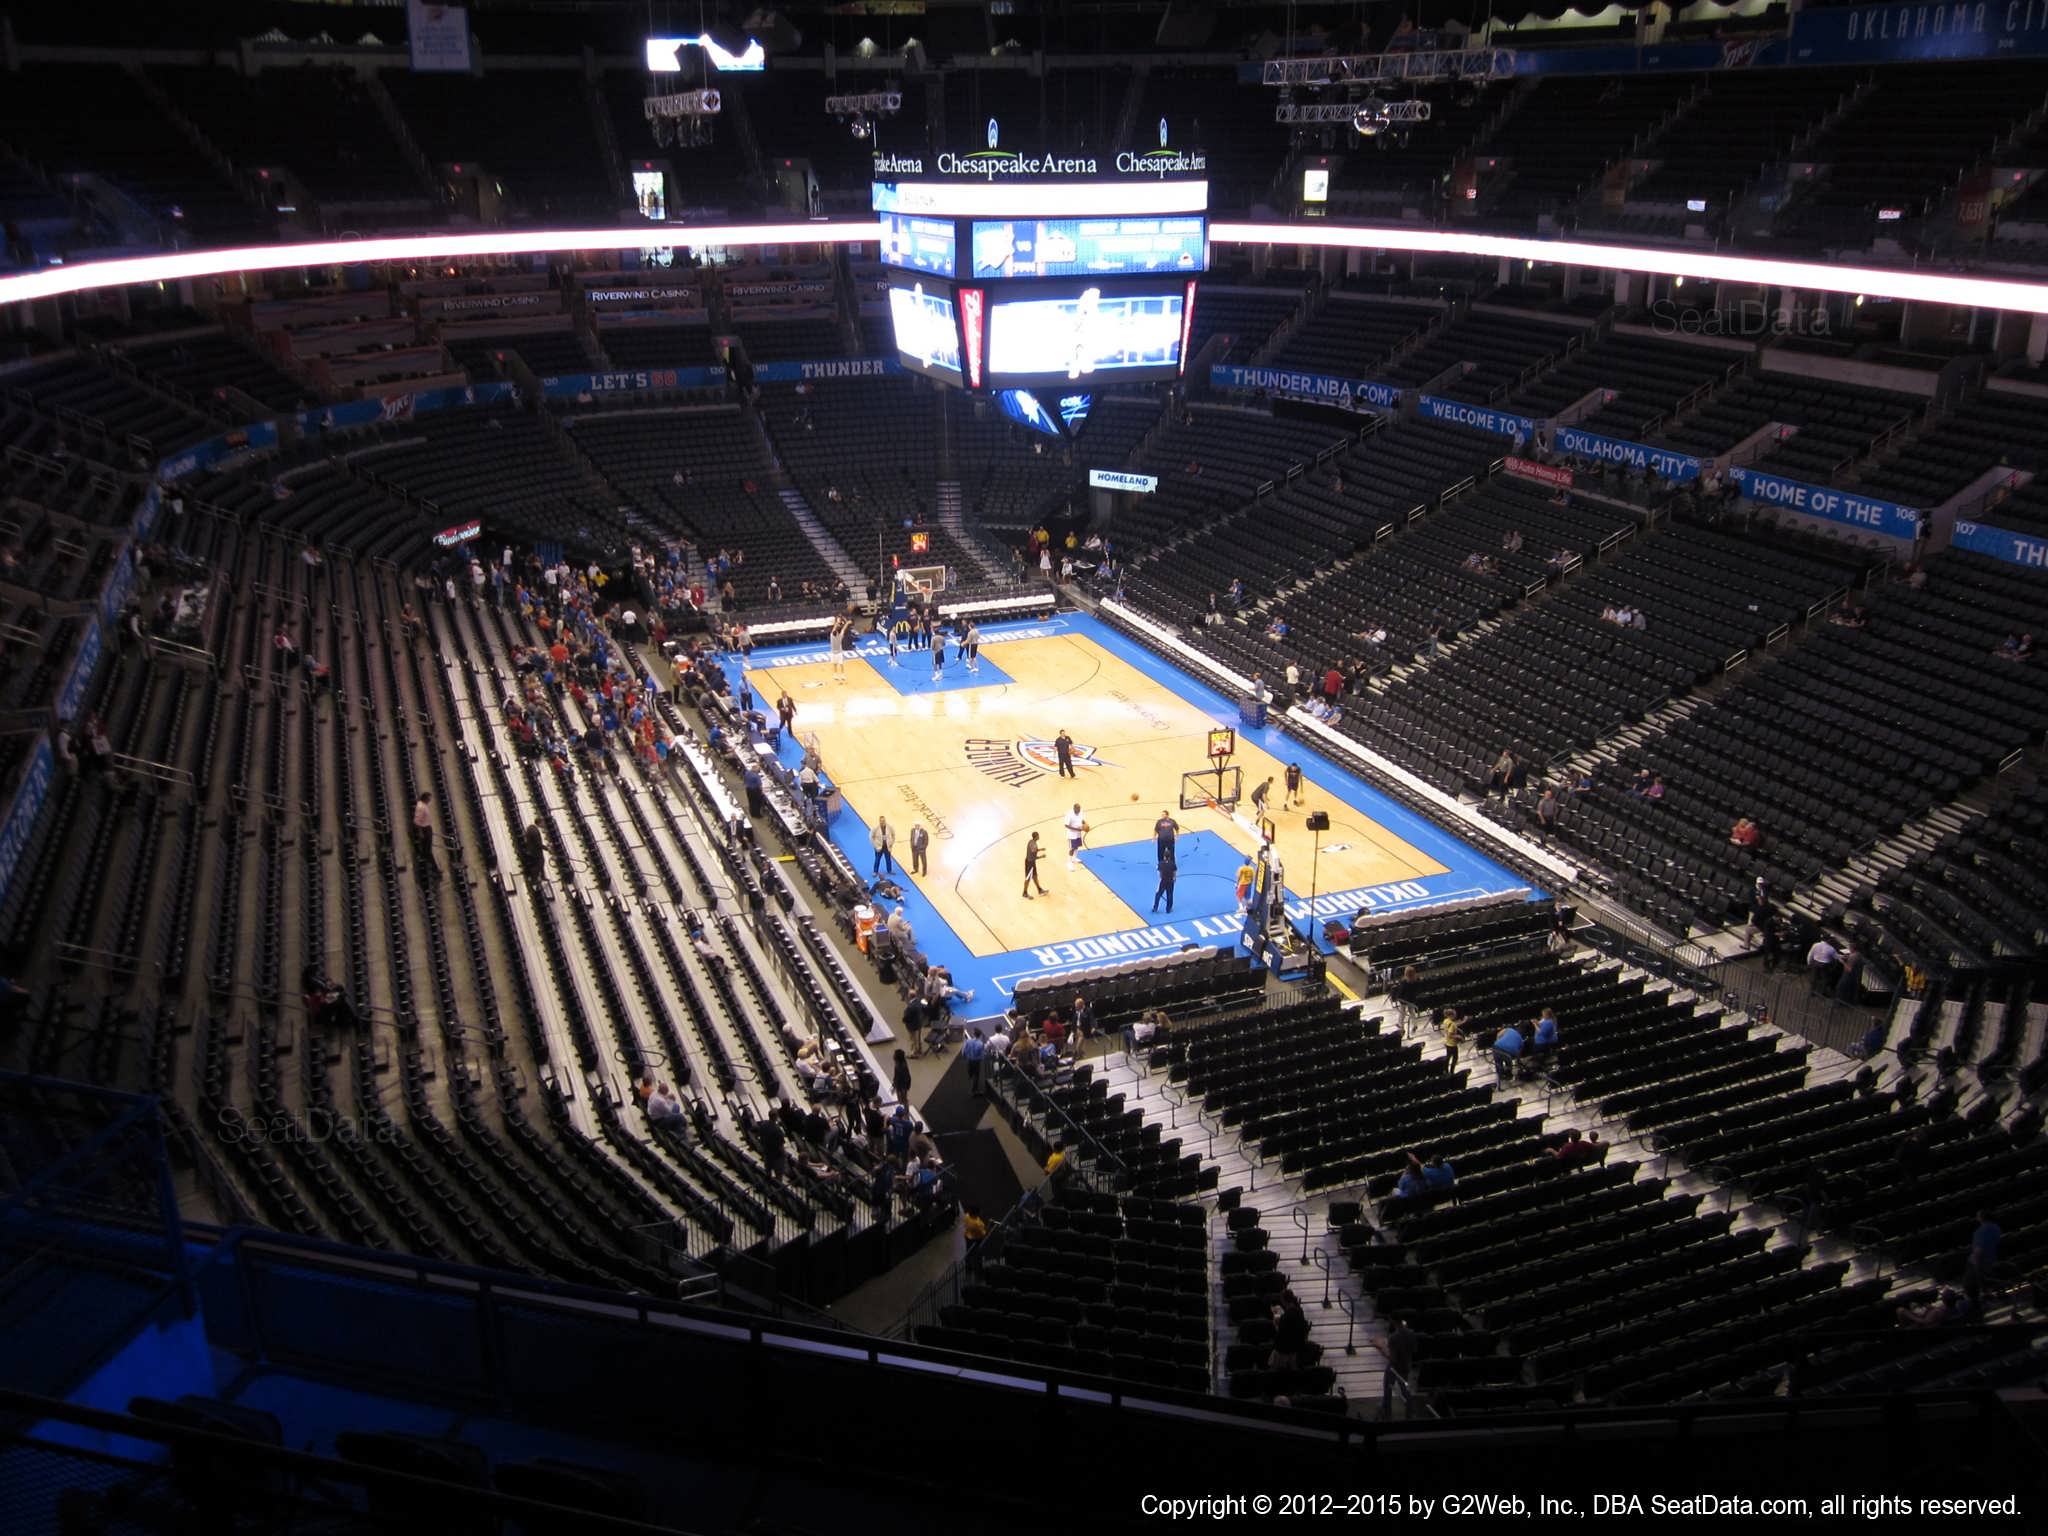 Seat view from section 318 at Chesapeake Energy Arena, home of the Oklahoma City Thunder